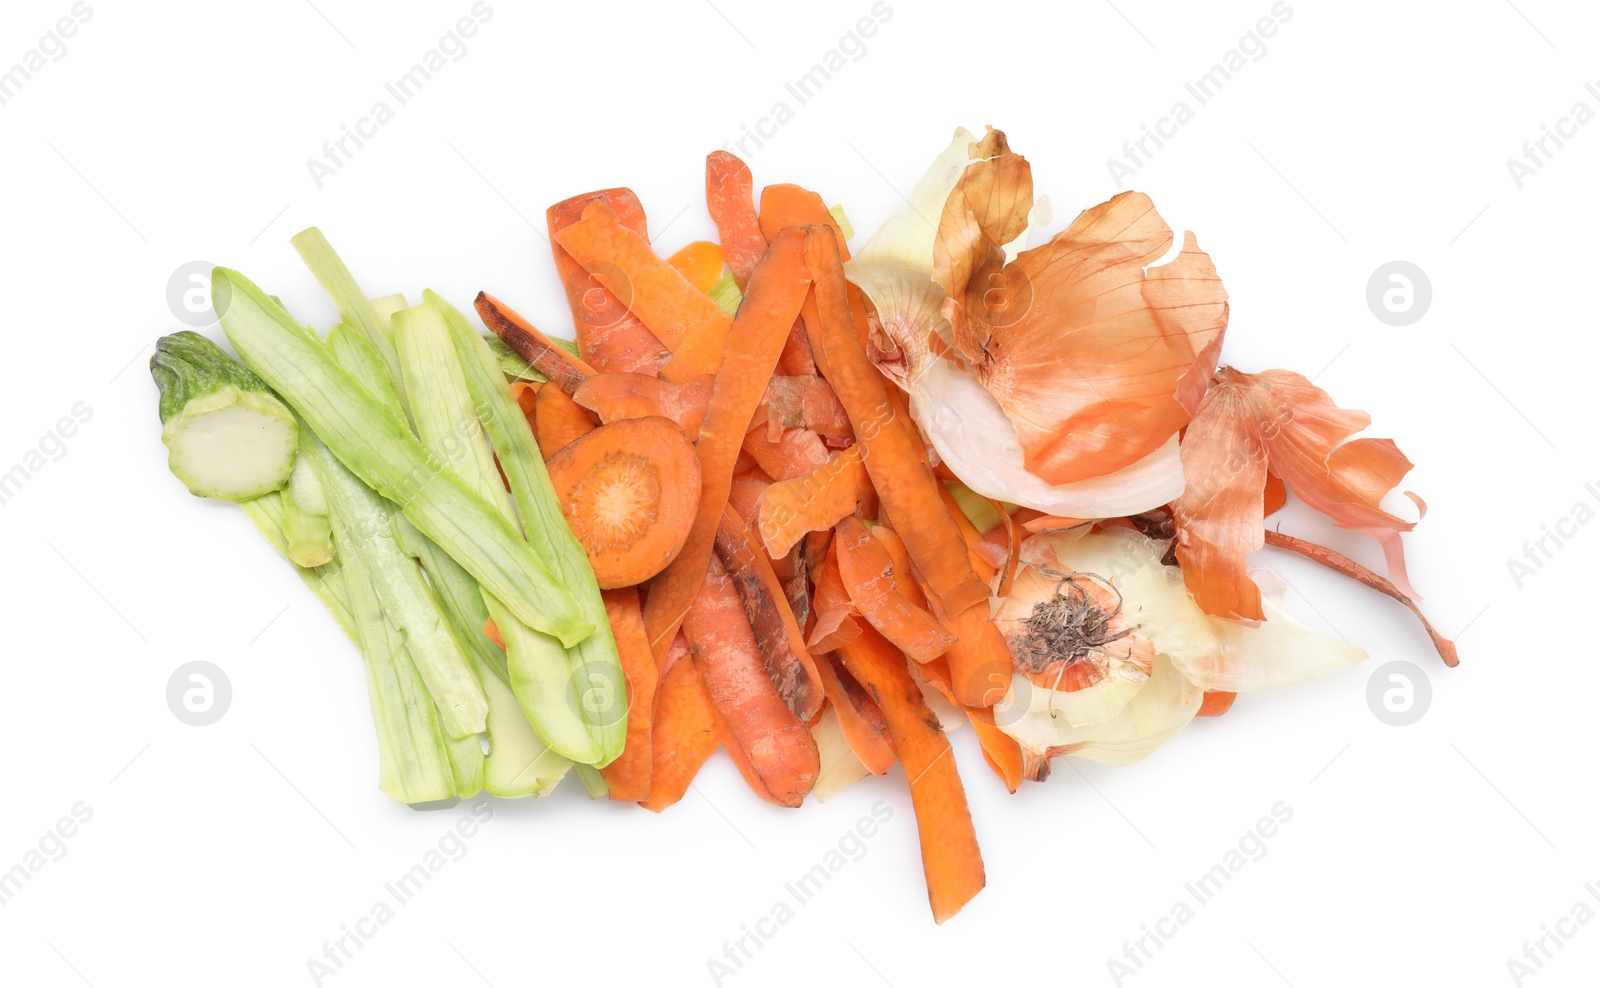 Photo of Peels of fresh vegetables isolated on white